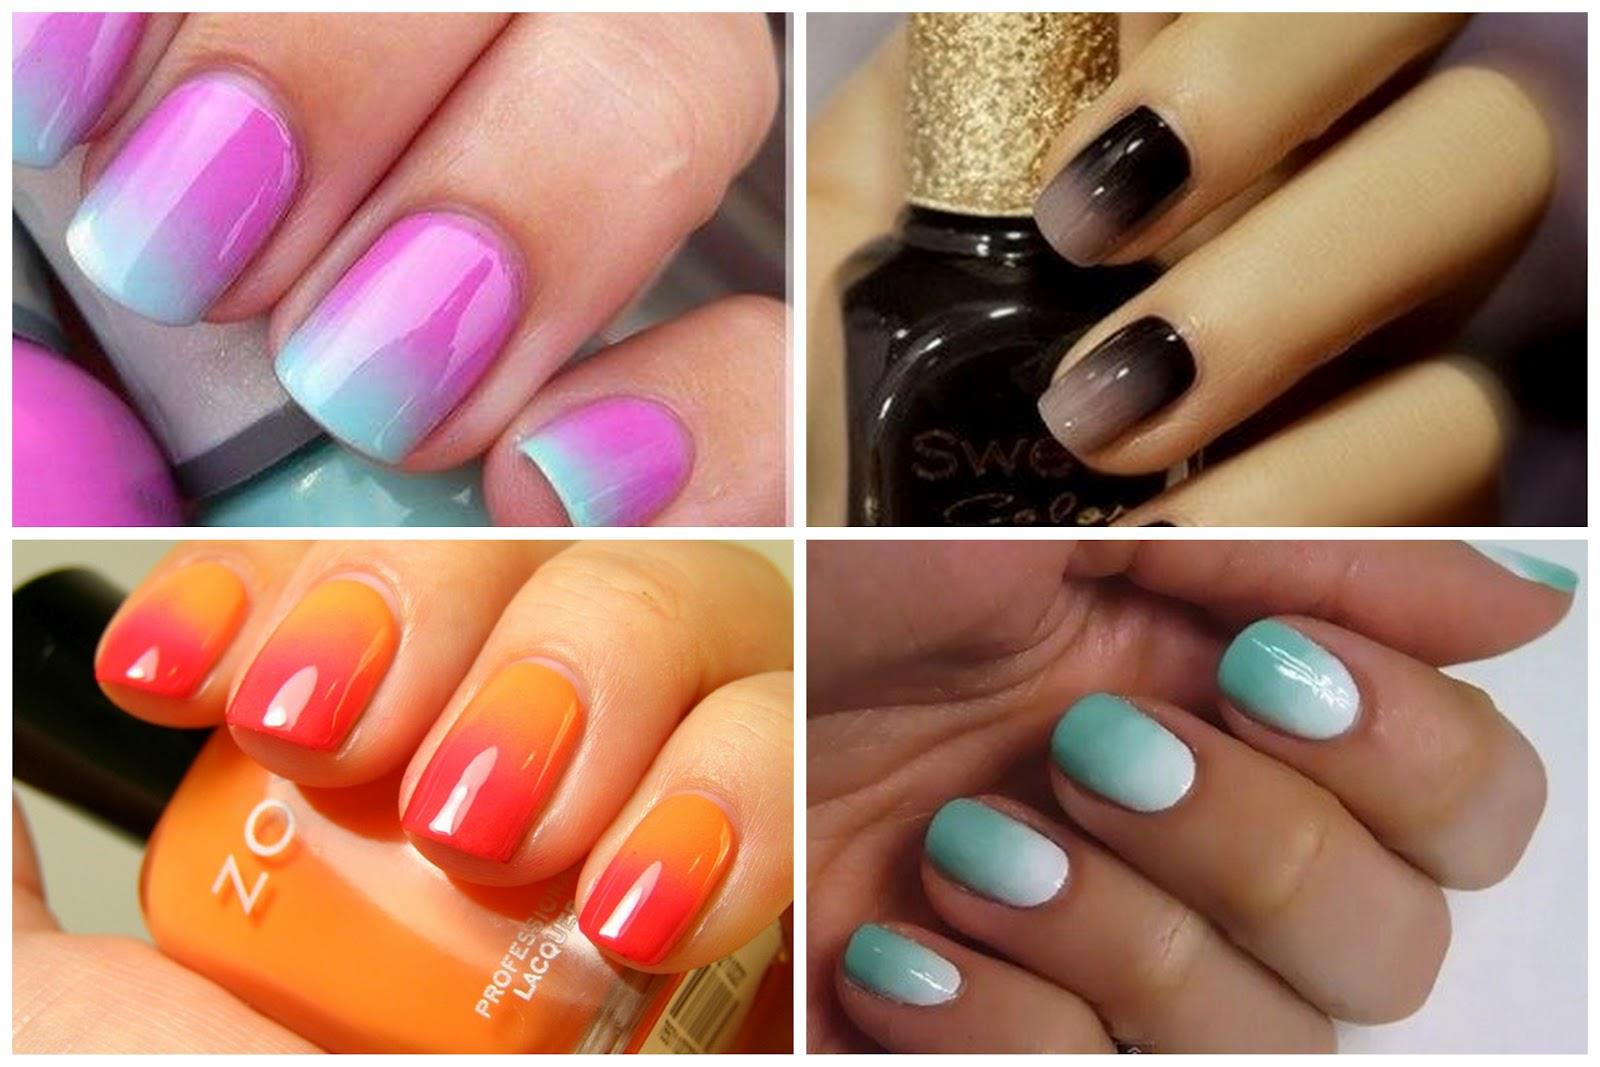 3. How to Create an Ombre Nail Design at Home - wide 6